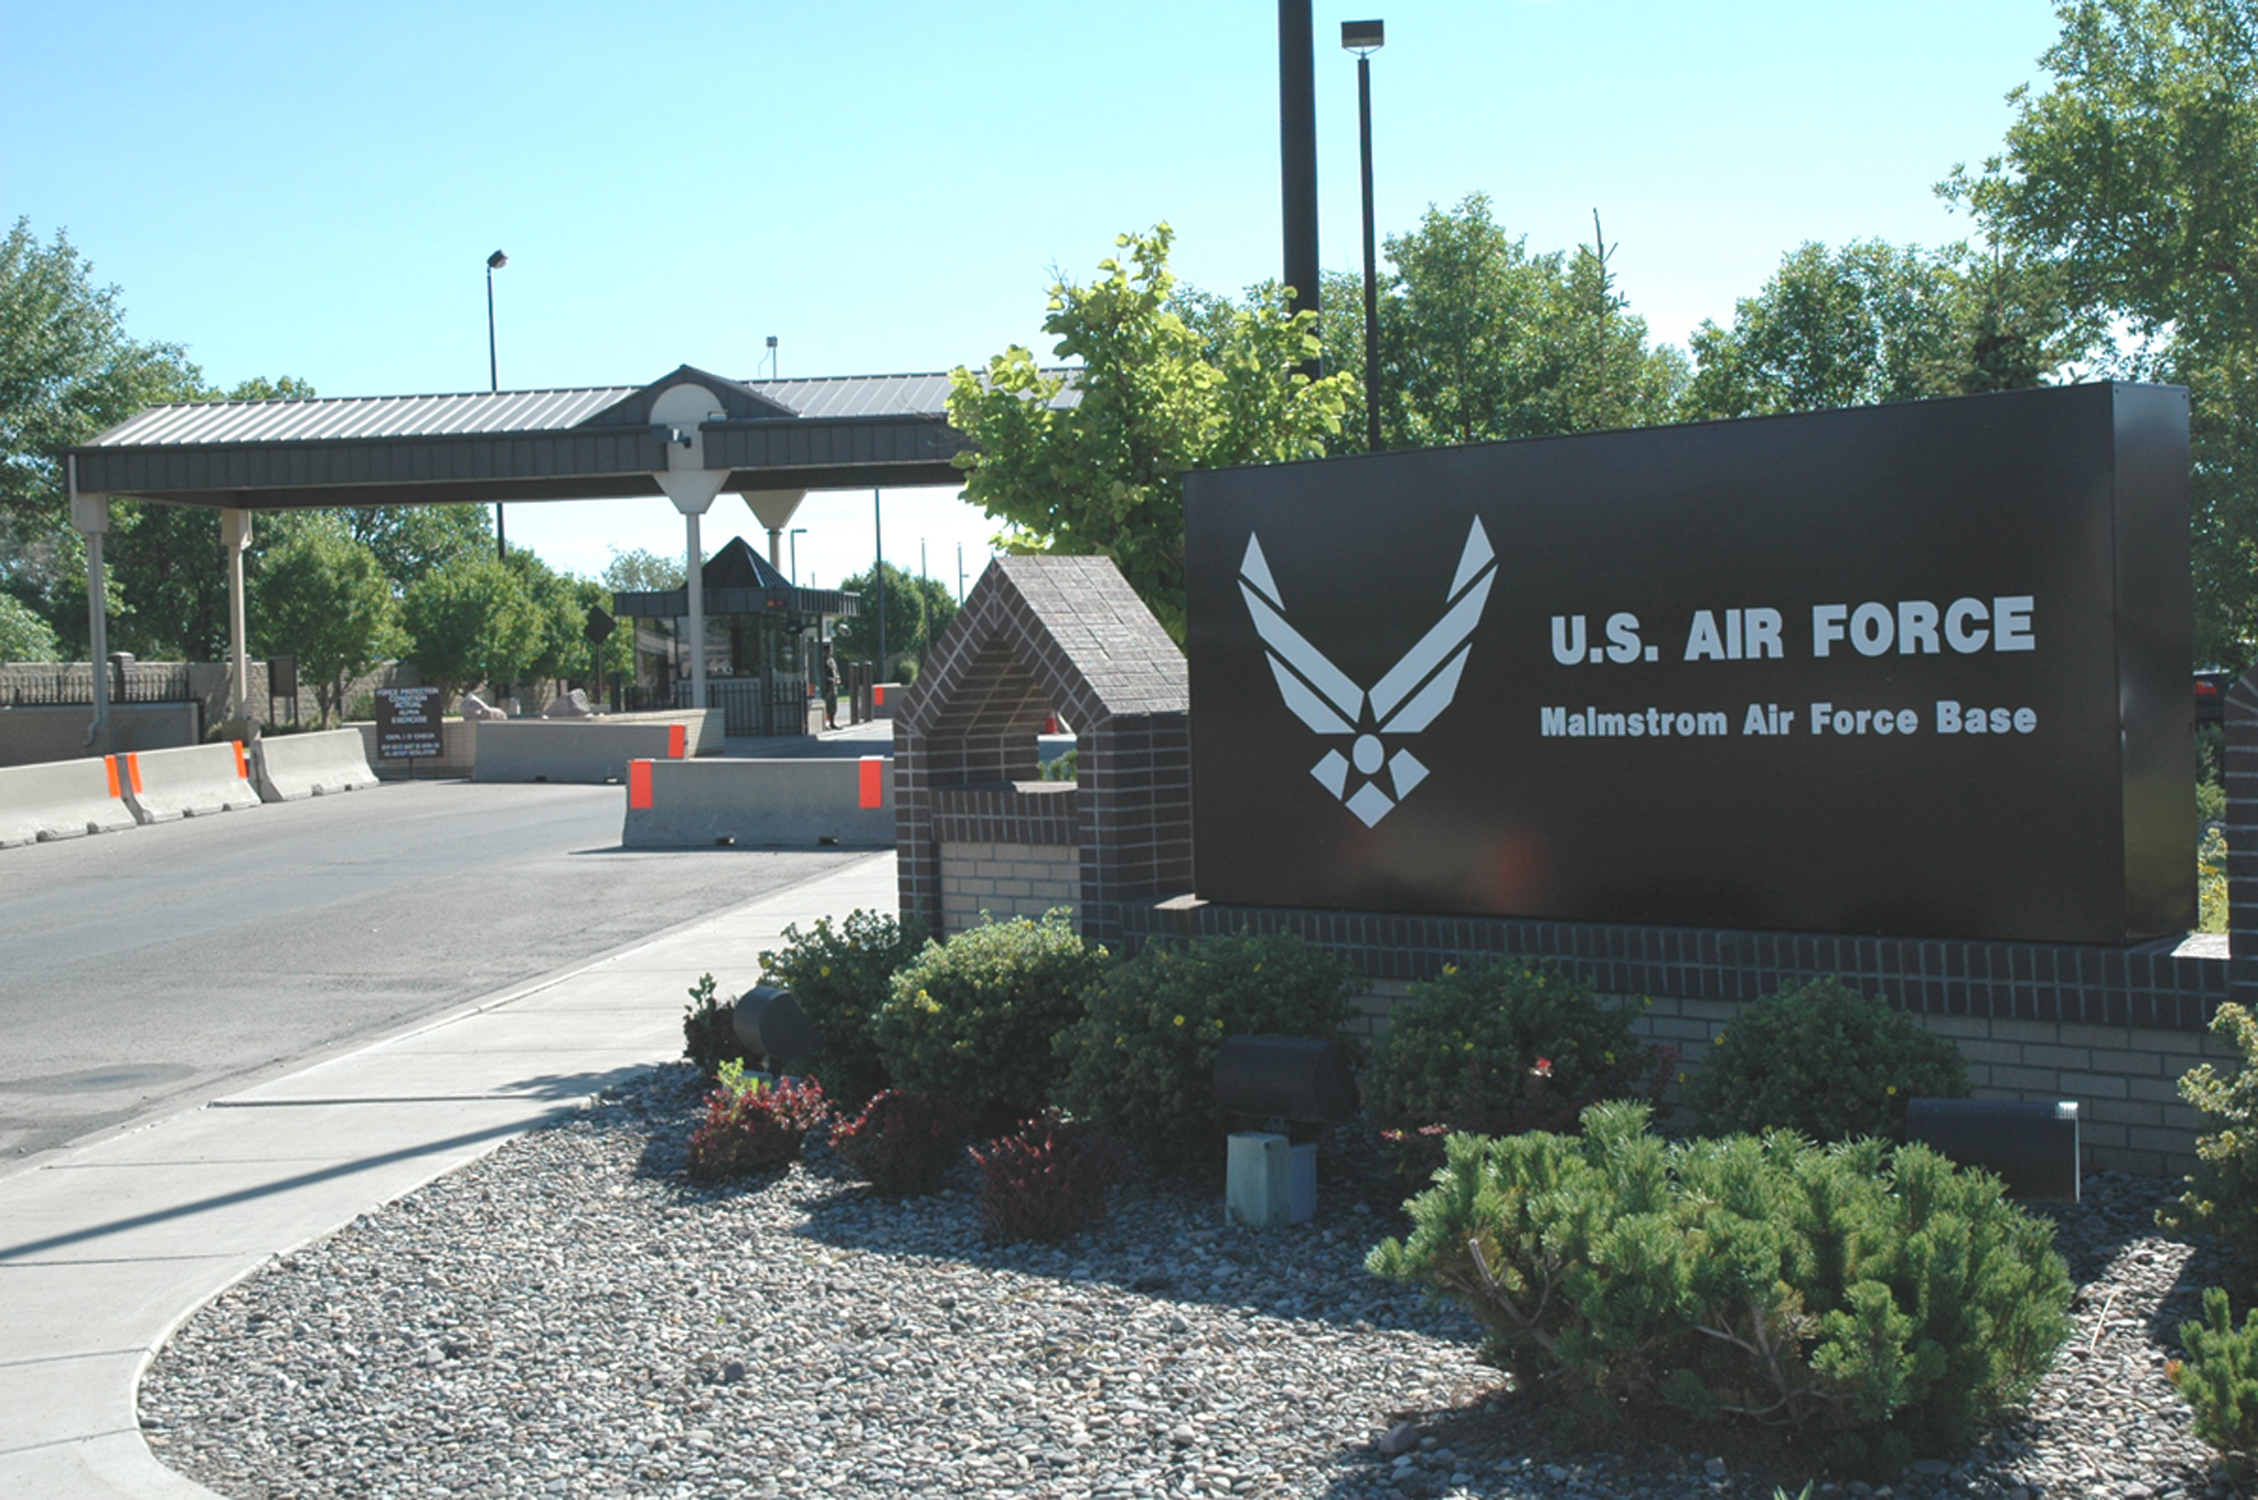 Rehoming used items this summer season > Malmstrom Air Force Base